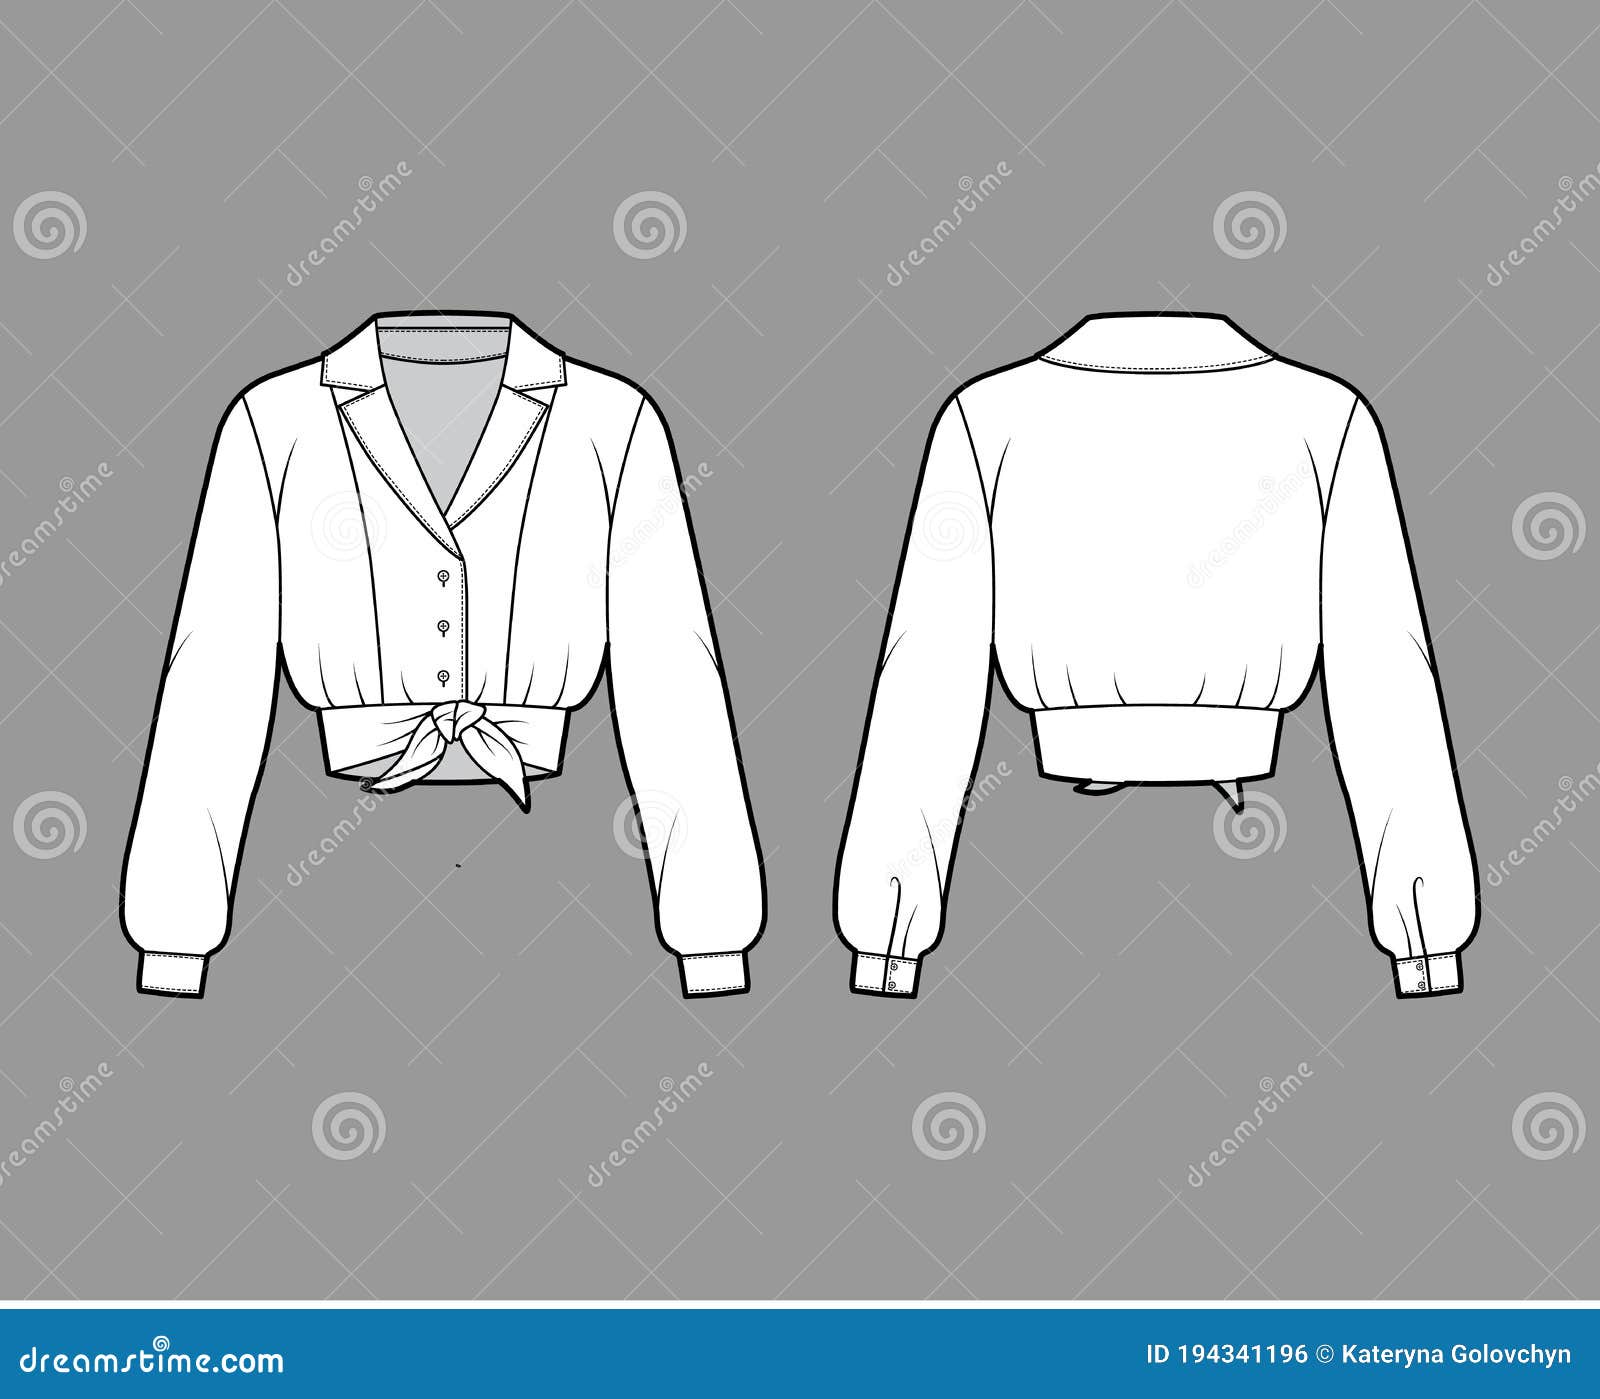 Tie-front Cropped Shirt Technical Fashion Illustration with Camp Collar ...